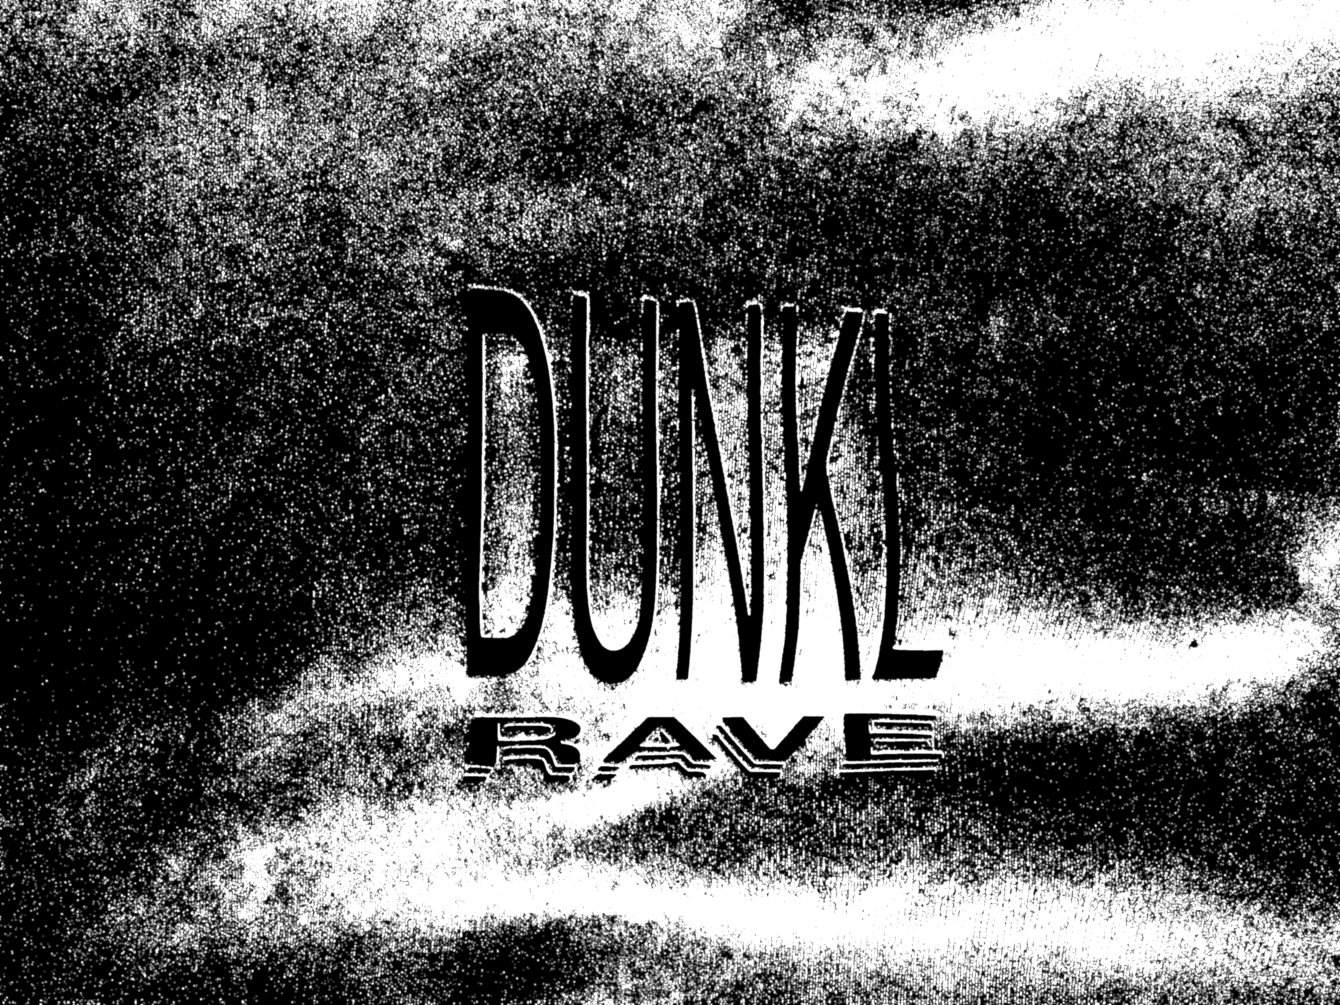 Dunkl with Kaiser, Lifka, Xynia,Casio, Non Reversible, Philip Bader - Página frontal